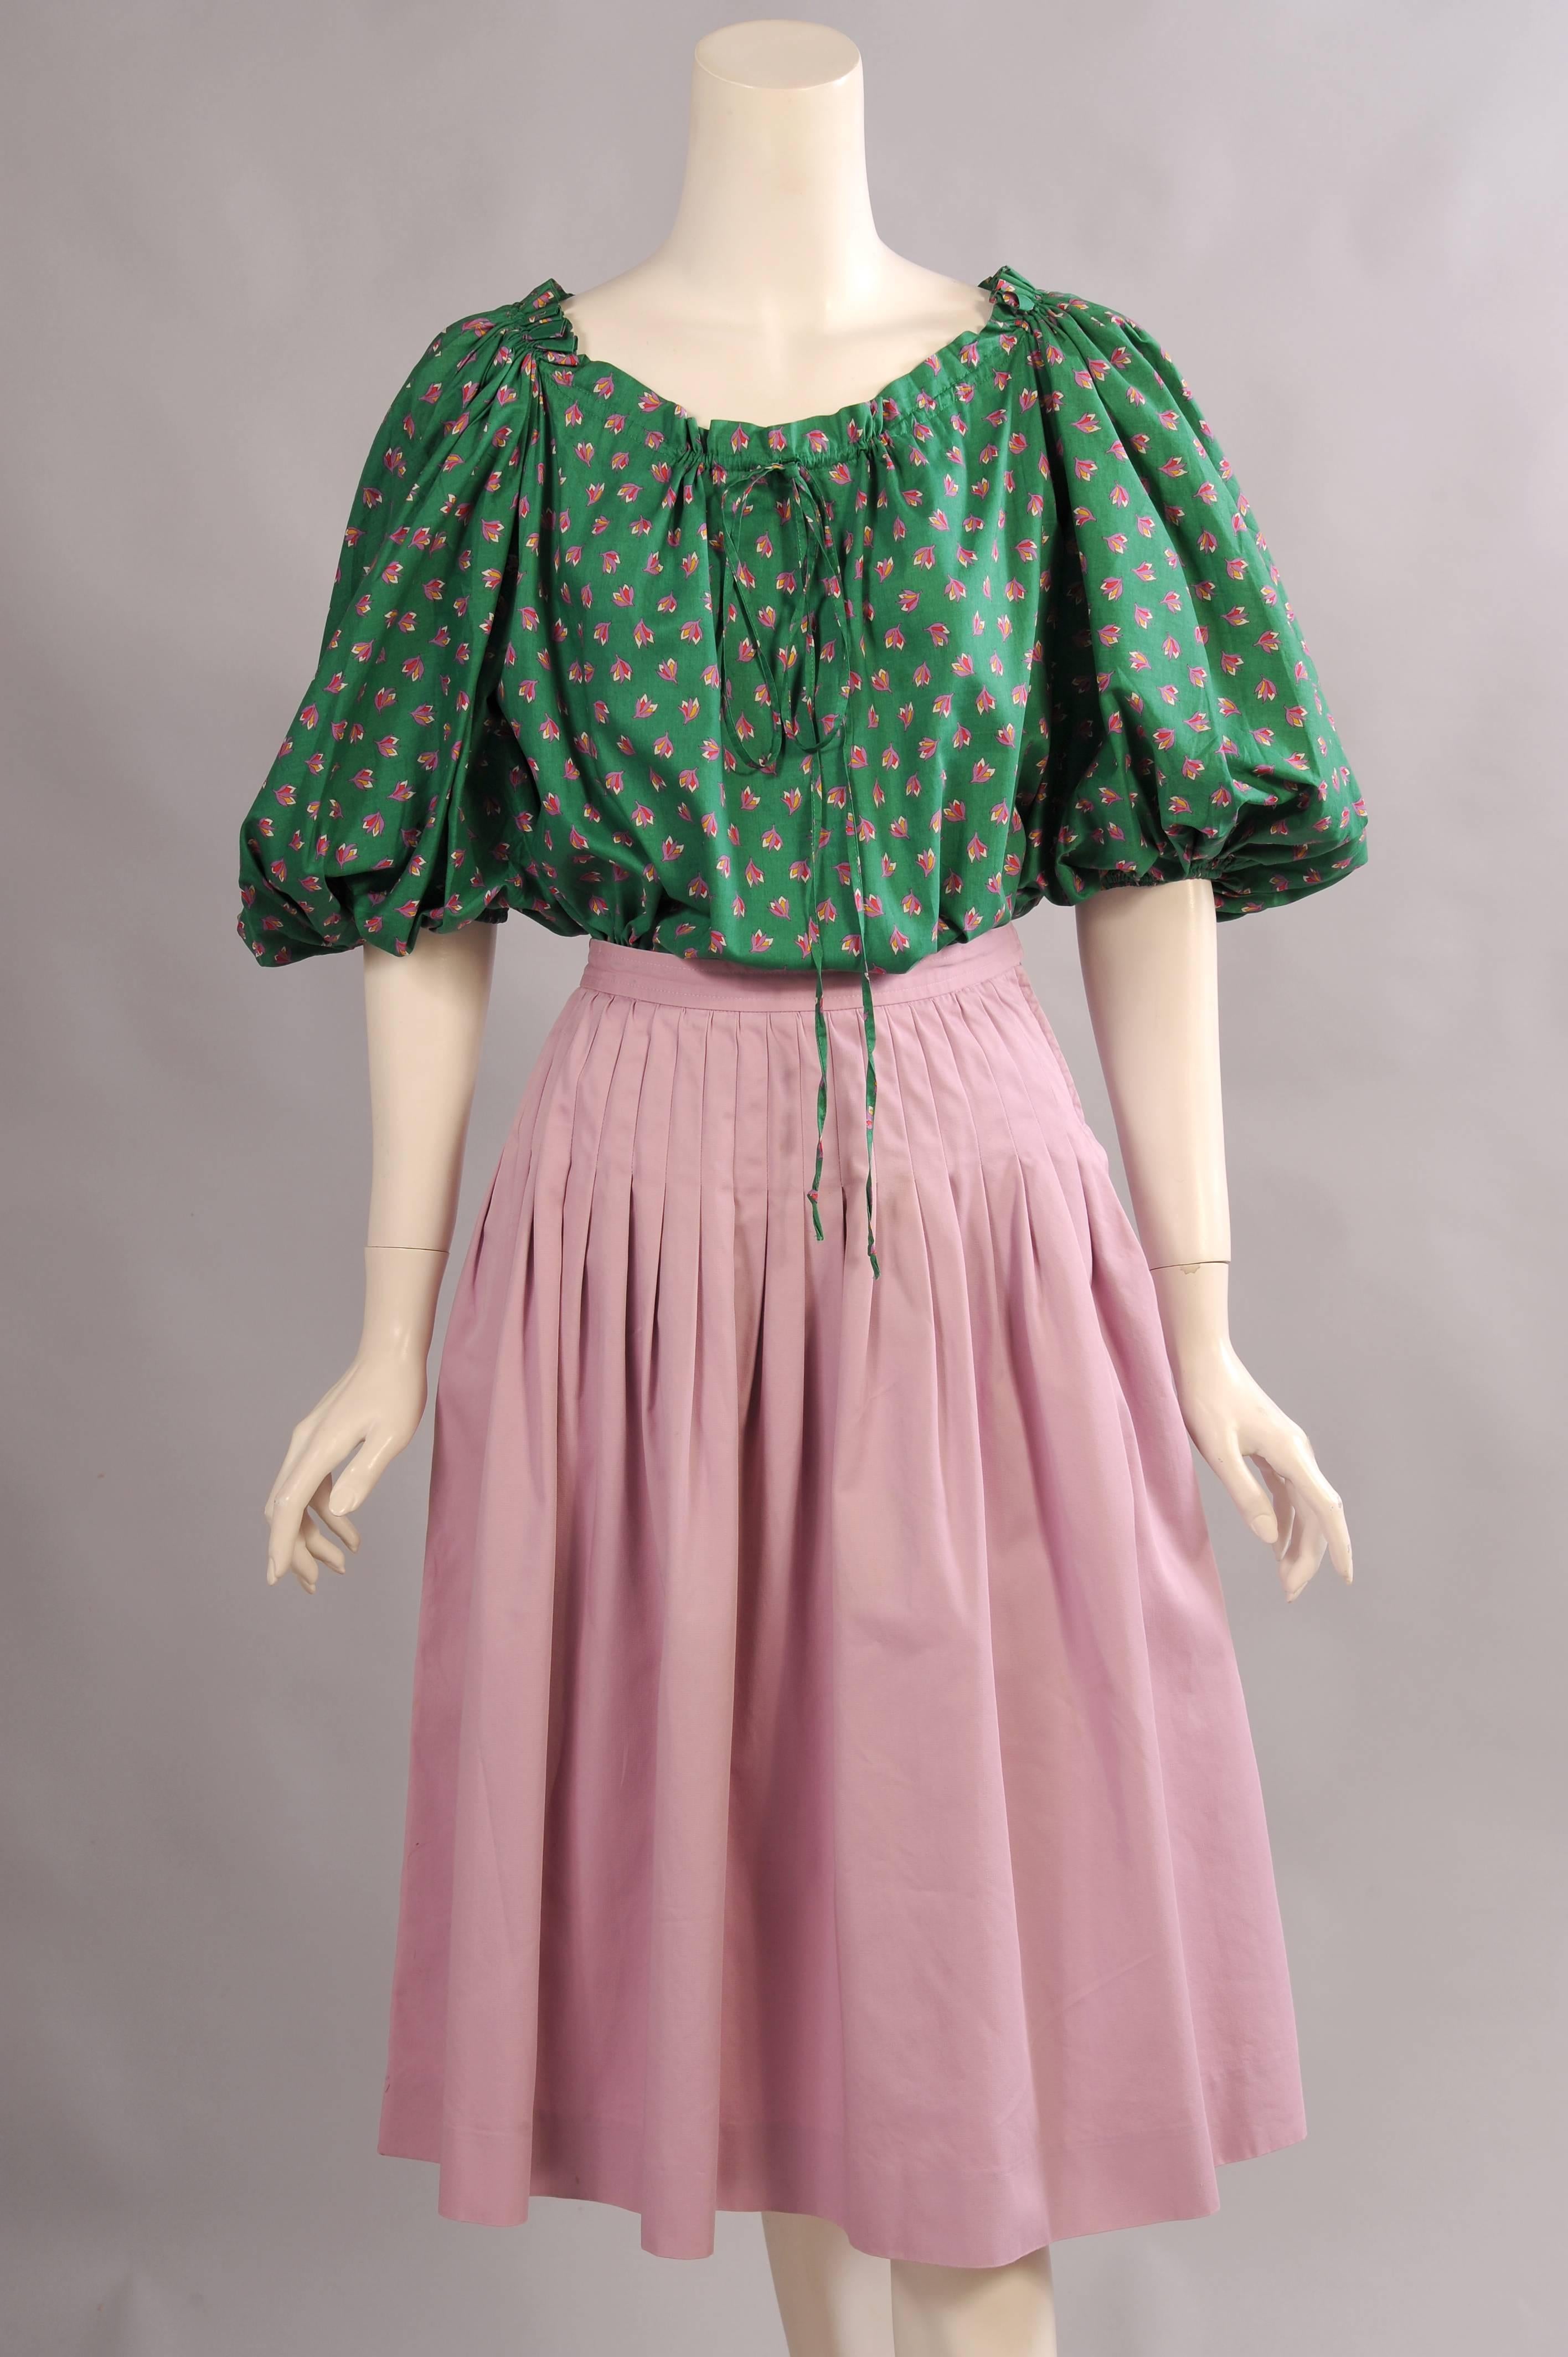 A bright green peasant style cotton blouse with a lavender floral design has a gathered drawstring neckline and full sleeves with elastic. The coordinating lavender cotton skirt has a natural waistline, stitched down pleats and two pockets concealed